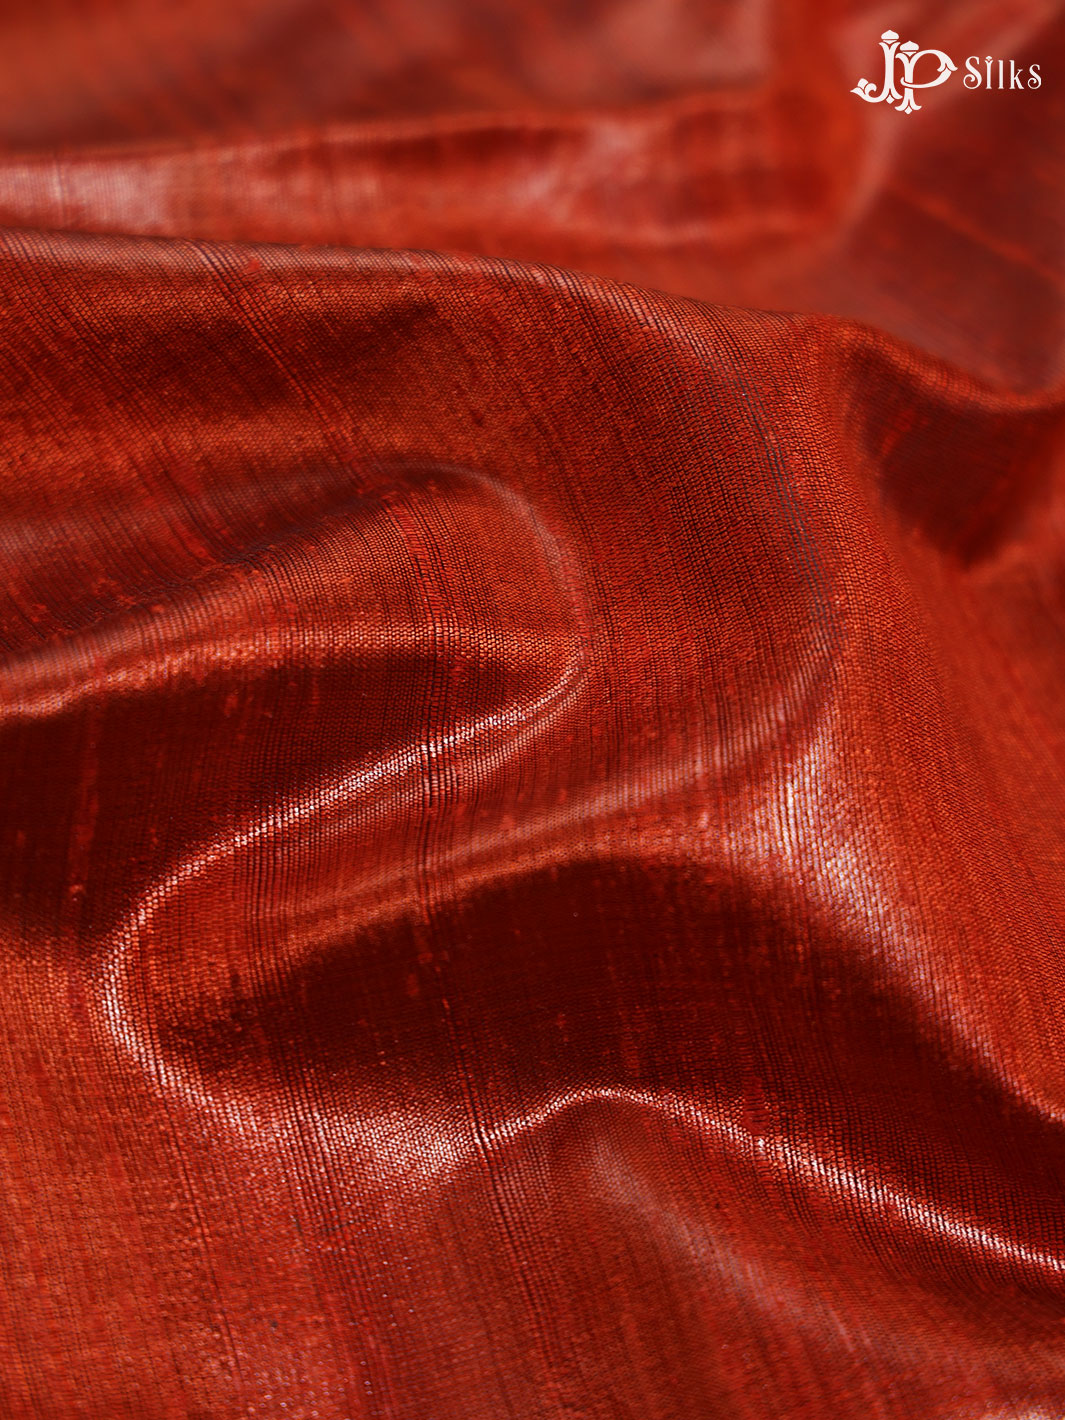 Red and Yellow Tussar Silk Saree - E31 - View 5